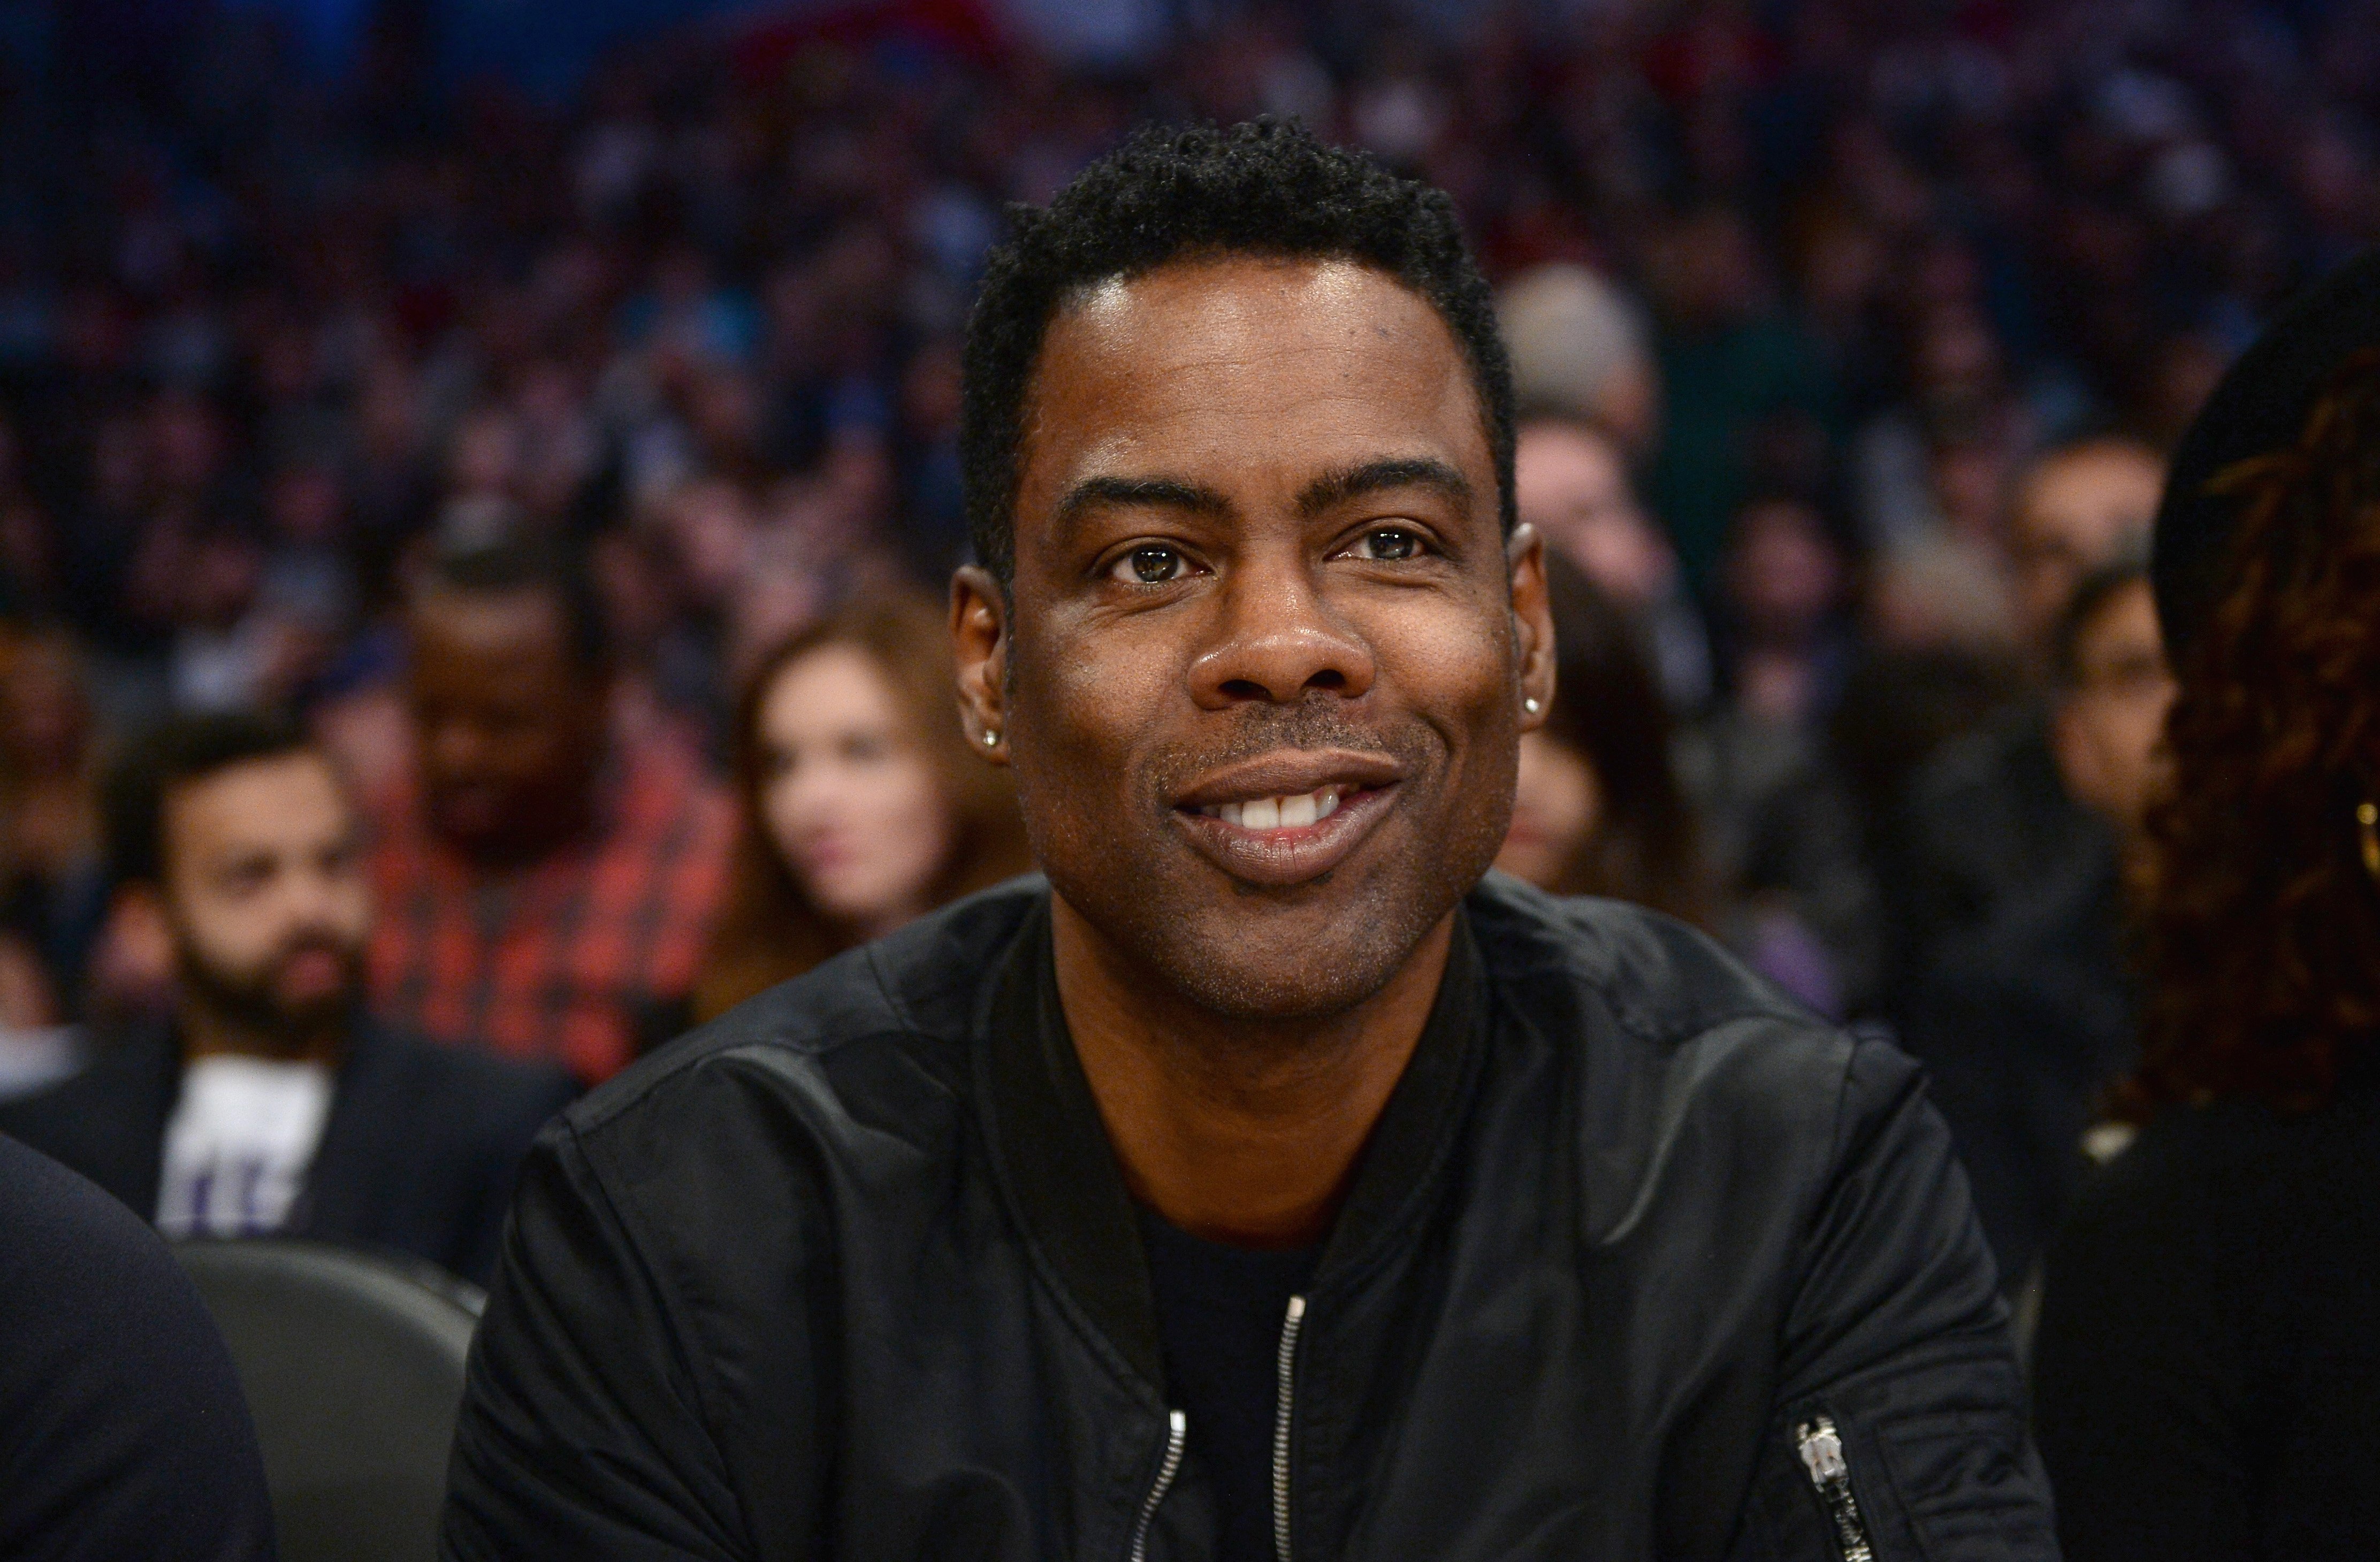 Chris Rock attending the NBA All-Star Game 2018 at Staples Center on February 18, 2018 in Los Angeles, California. | Source: Getty